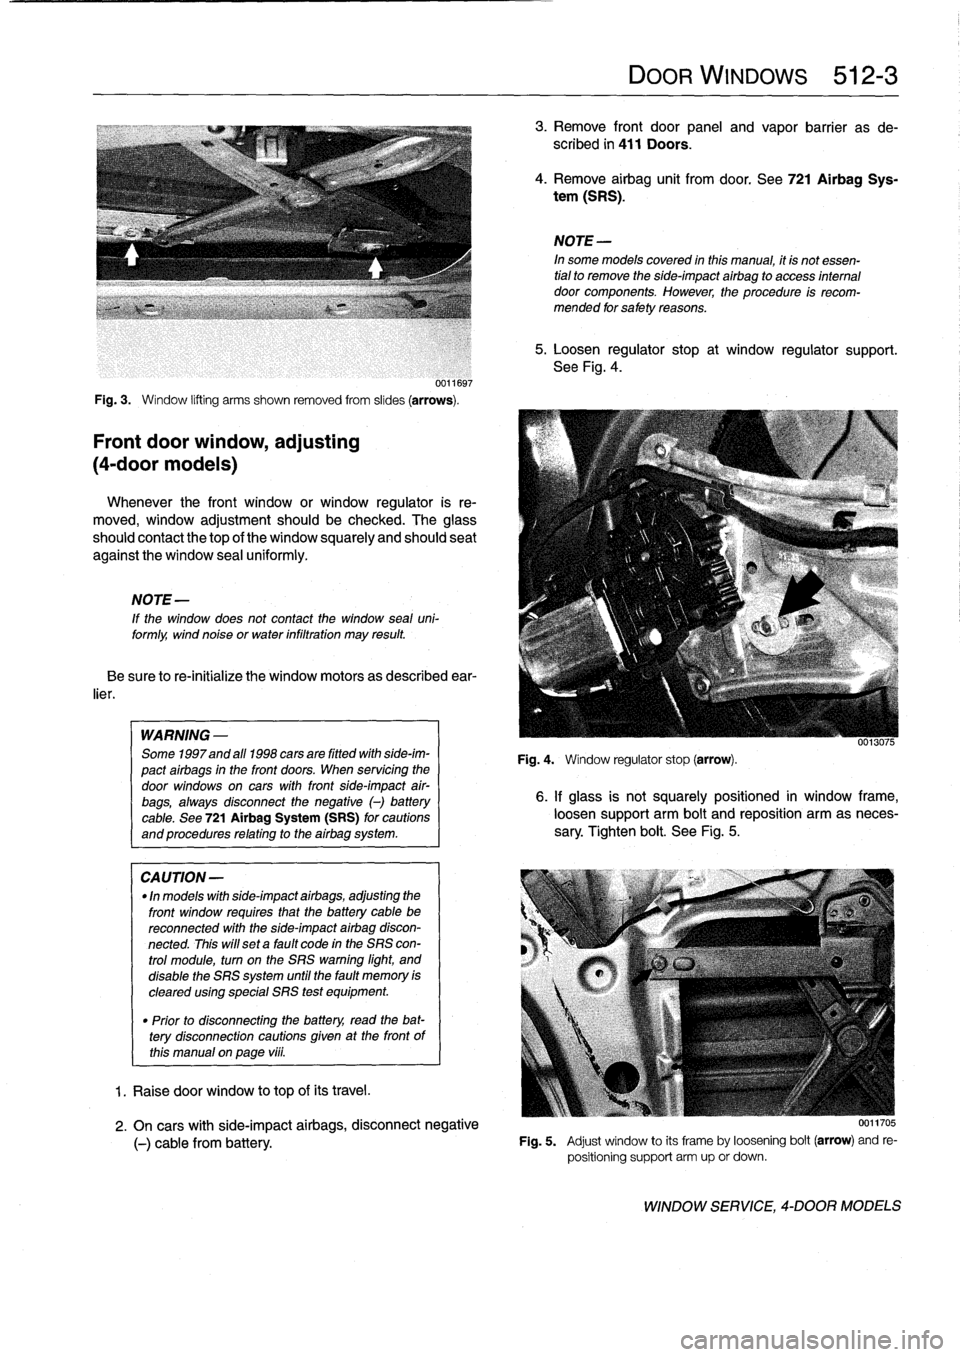 BMW 318i 1997 E36 User Guide 
0011697

Fig
.
3
.

	

Window
lifting
arms
shown
removed
from
slides
(arrows)
.

Front
door
window,
adjusting

(4-door
models)

Whenever
the
front
window
or
window
regulator
is
re-

moved,
window
adj